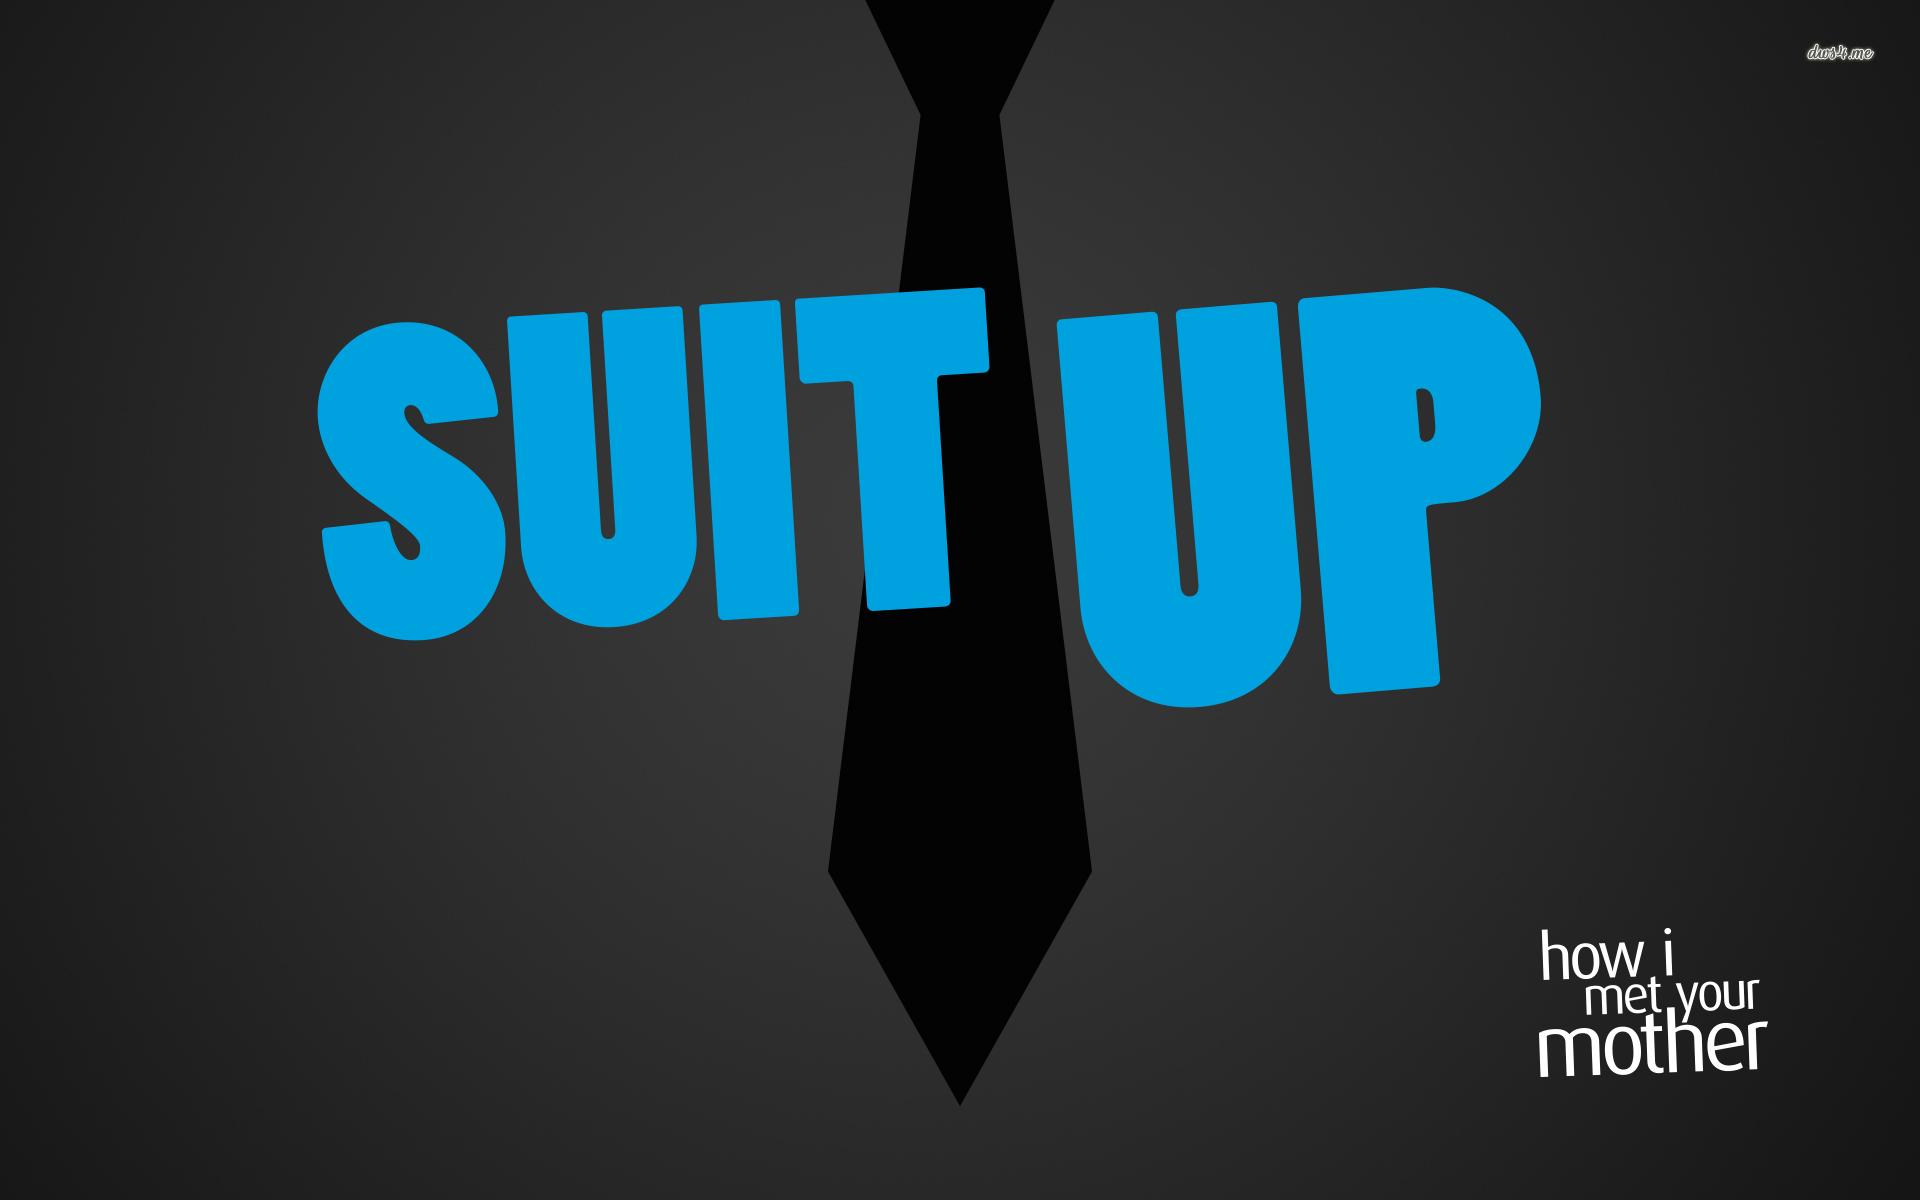 Suit up, Barney Stinson I Met Your Mother wallpaper Show